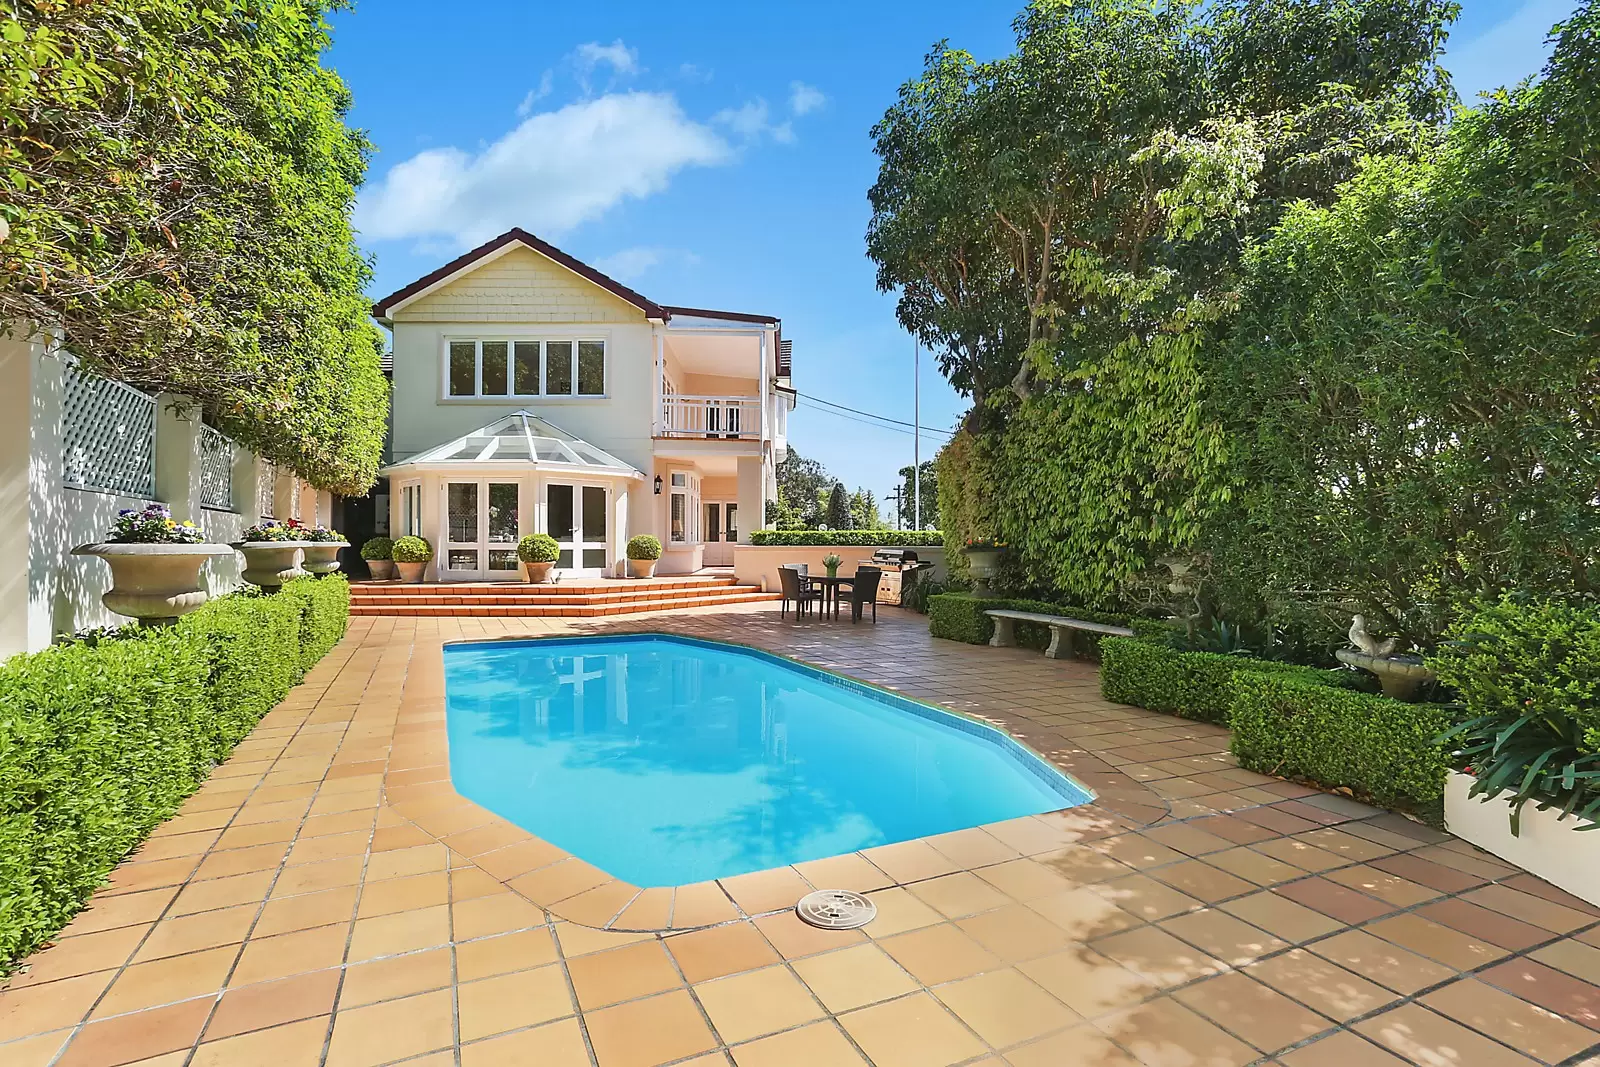 Photo #10: 2 Fitzwilliam Road, Vaucluse - Sold by Sydney Sotheby's International Realty